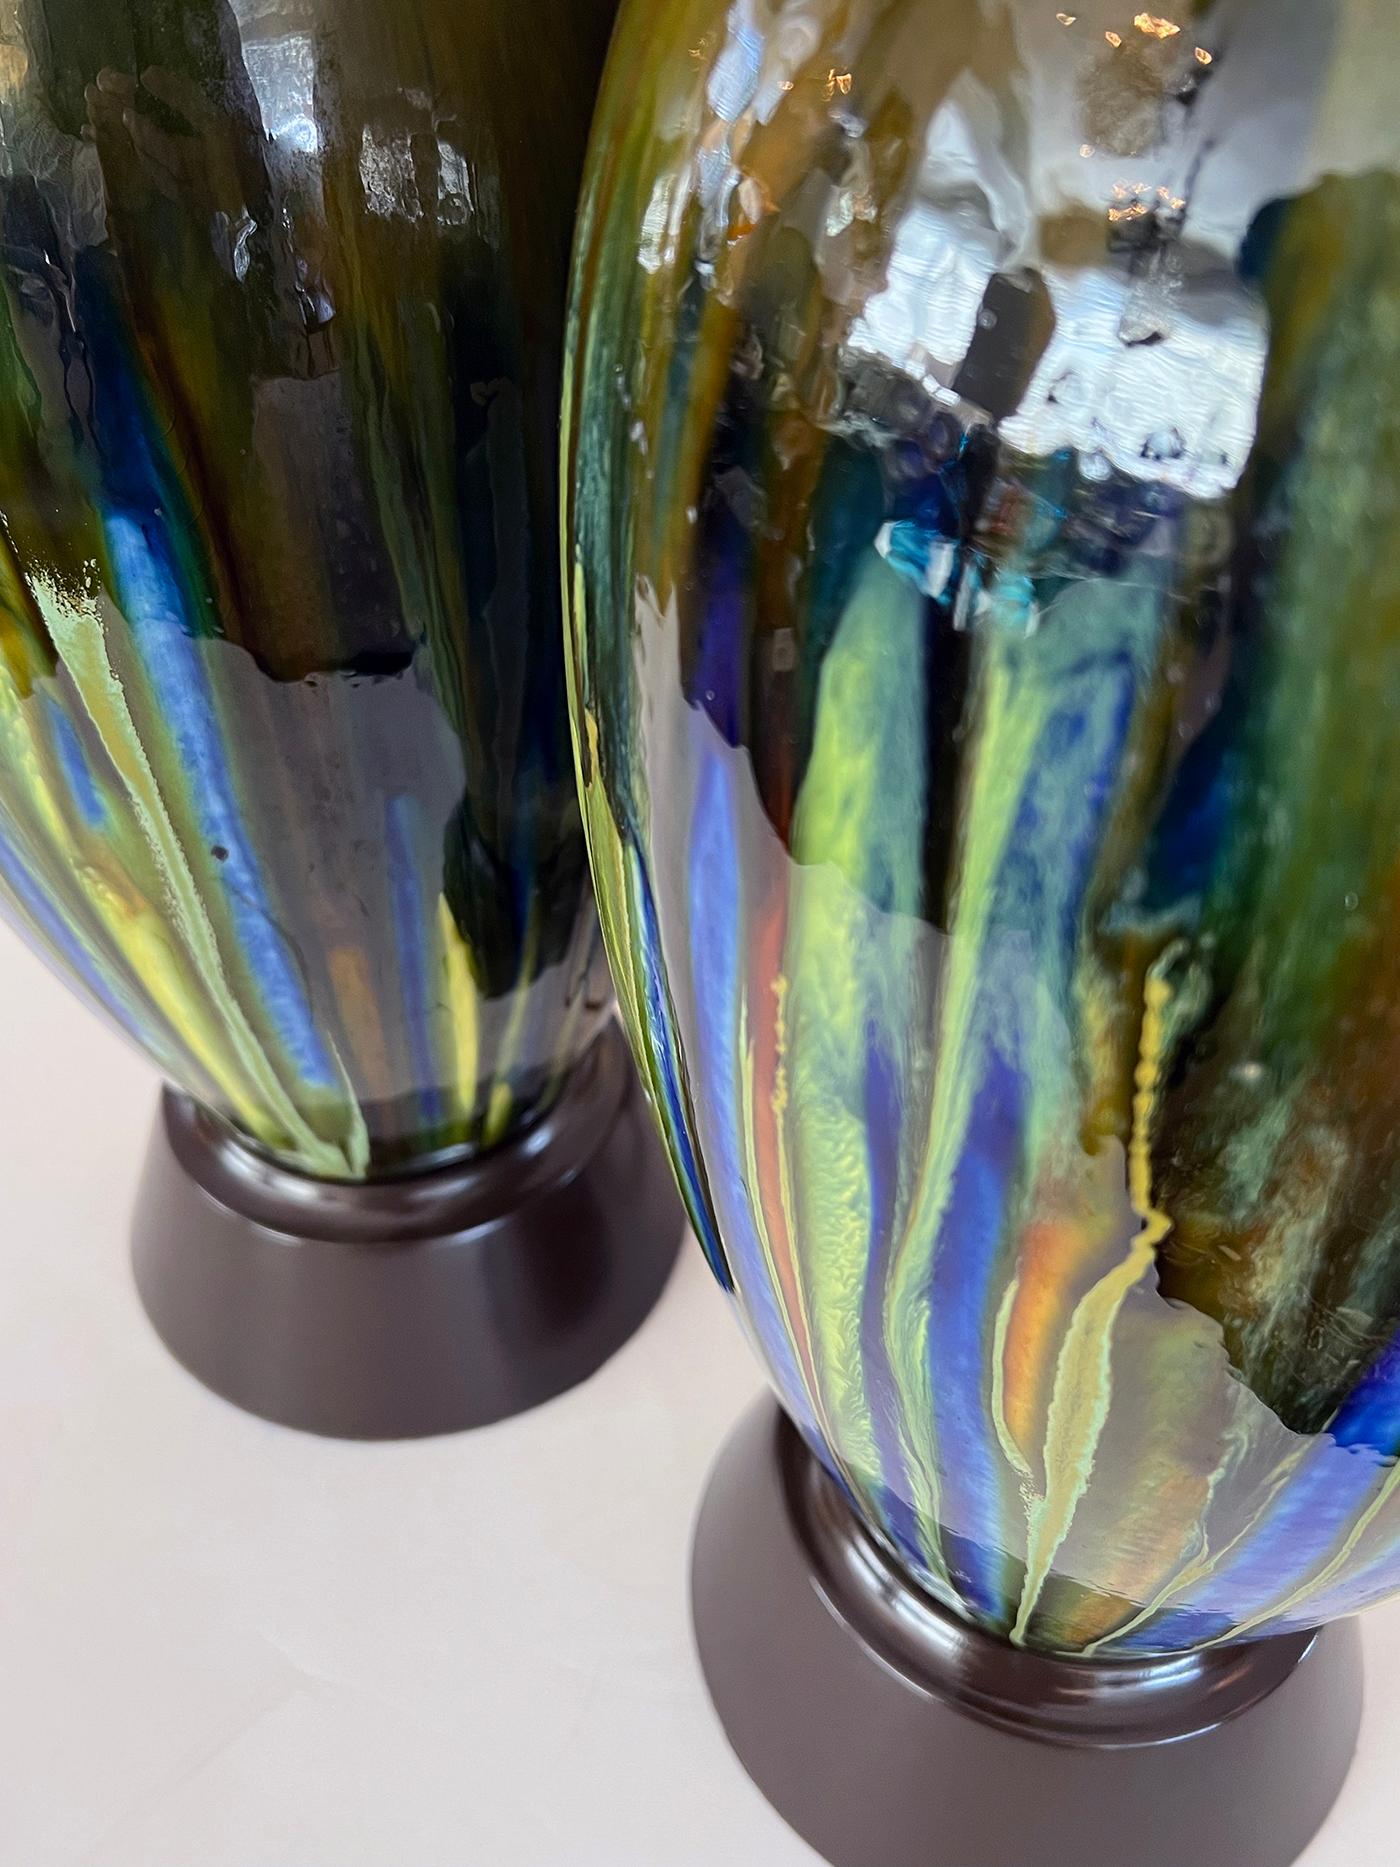 Each tall lamp of ovoid form with rich drip-glaze surface in colors of blue, green, yellow, sienna and brown; each resting on brown painted metal bases.